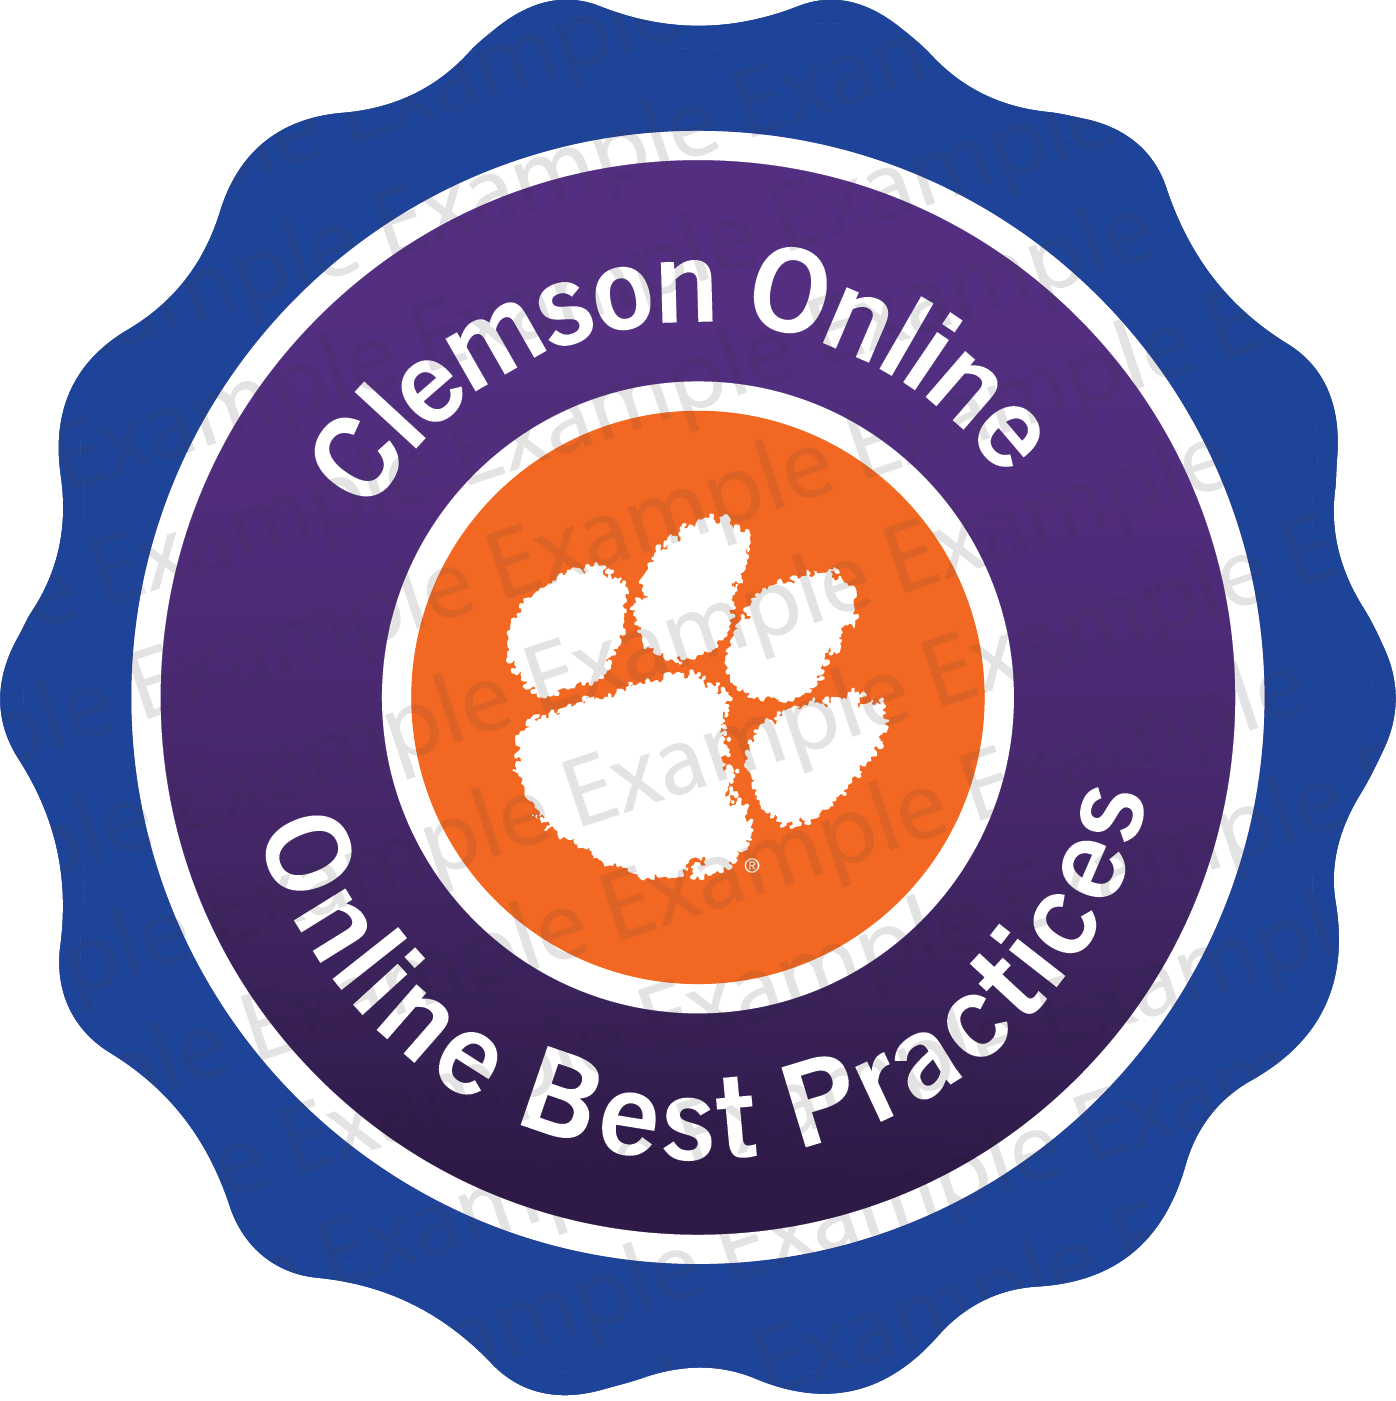 Orange, white, purple, and blue circular badge with text reading "Clemson Online" at the top and "Online Best Practices" at the bottom.